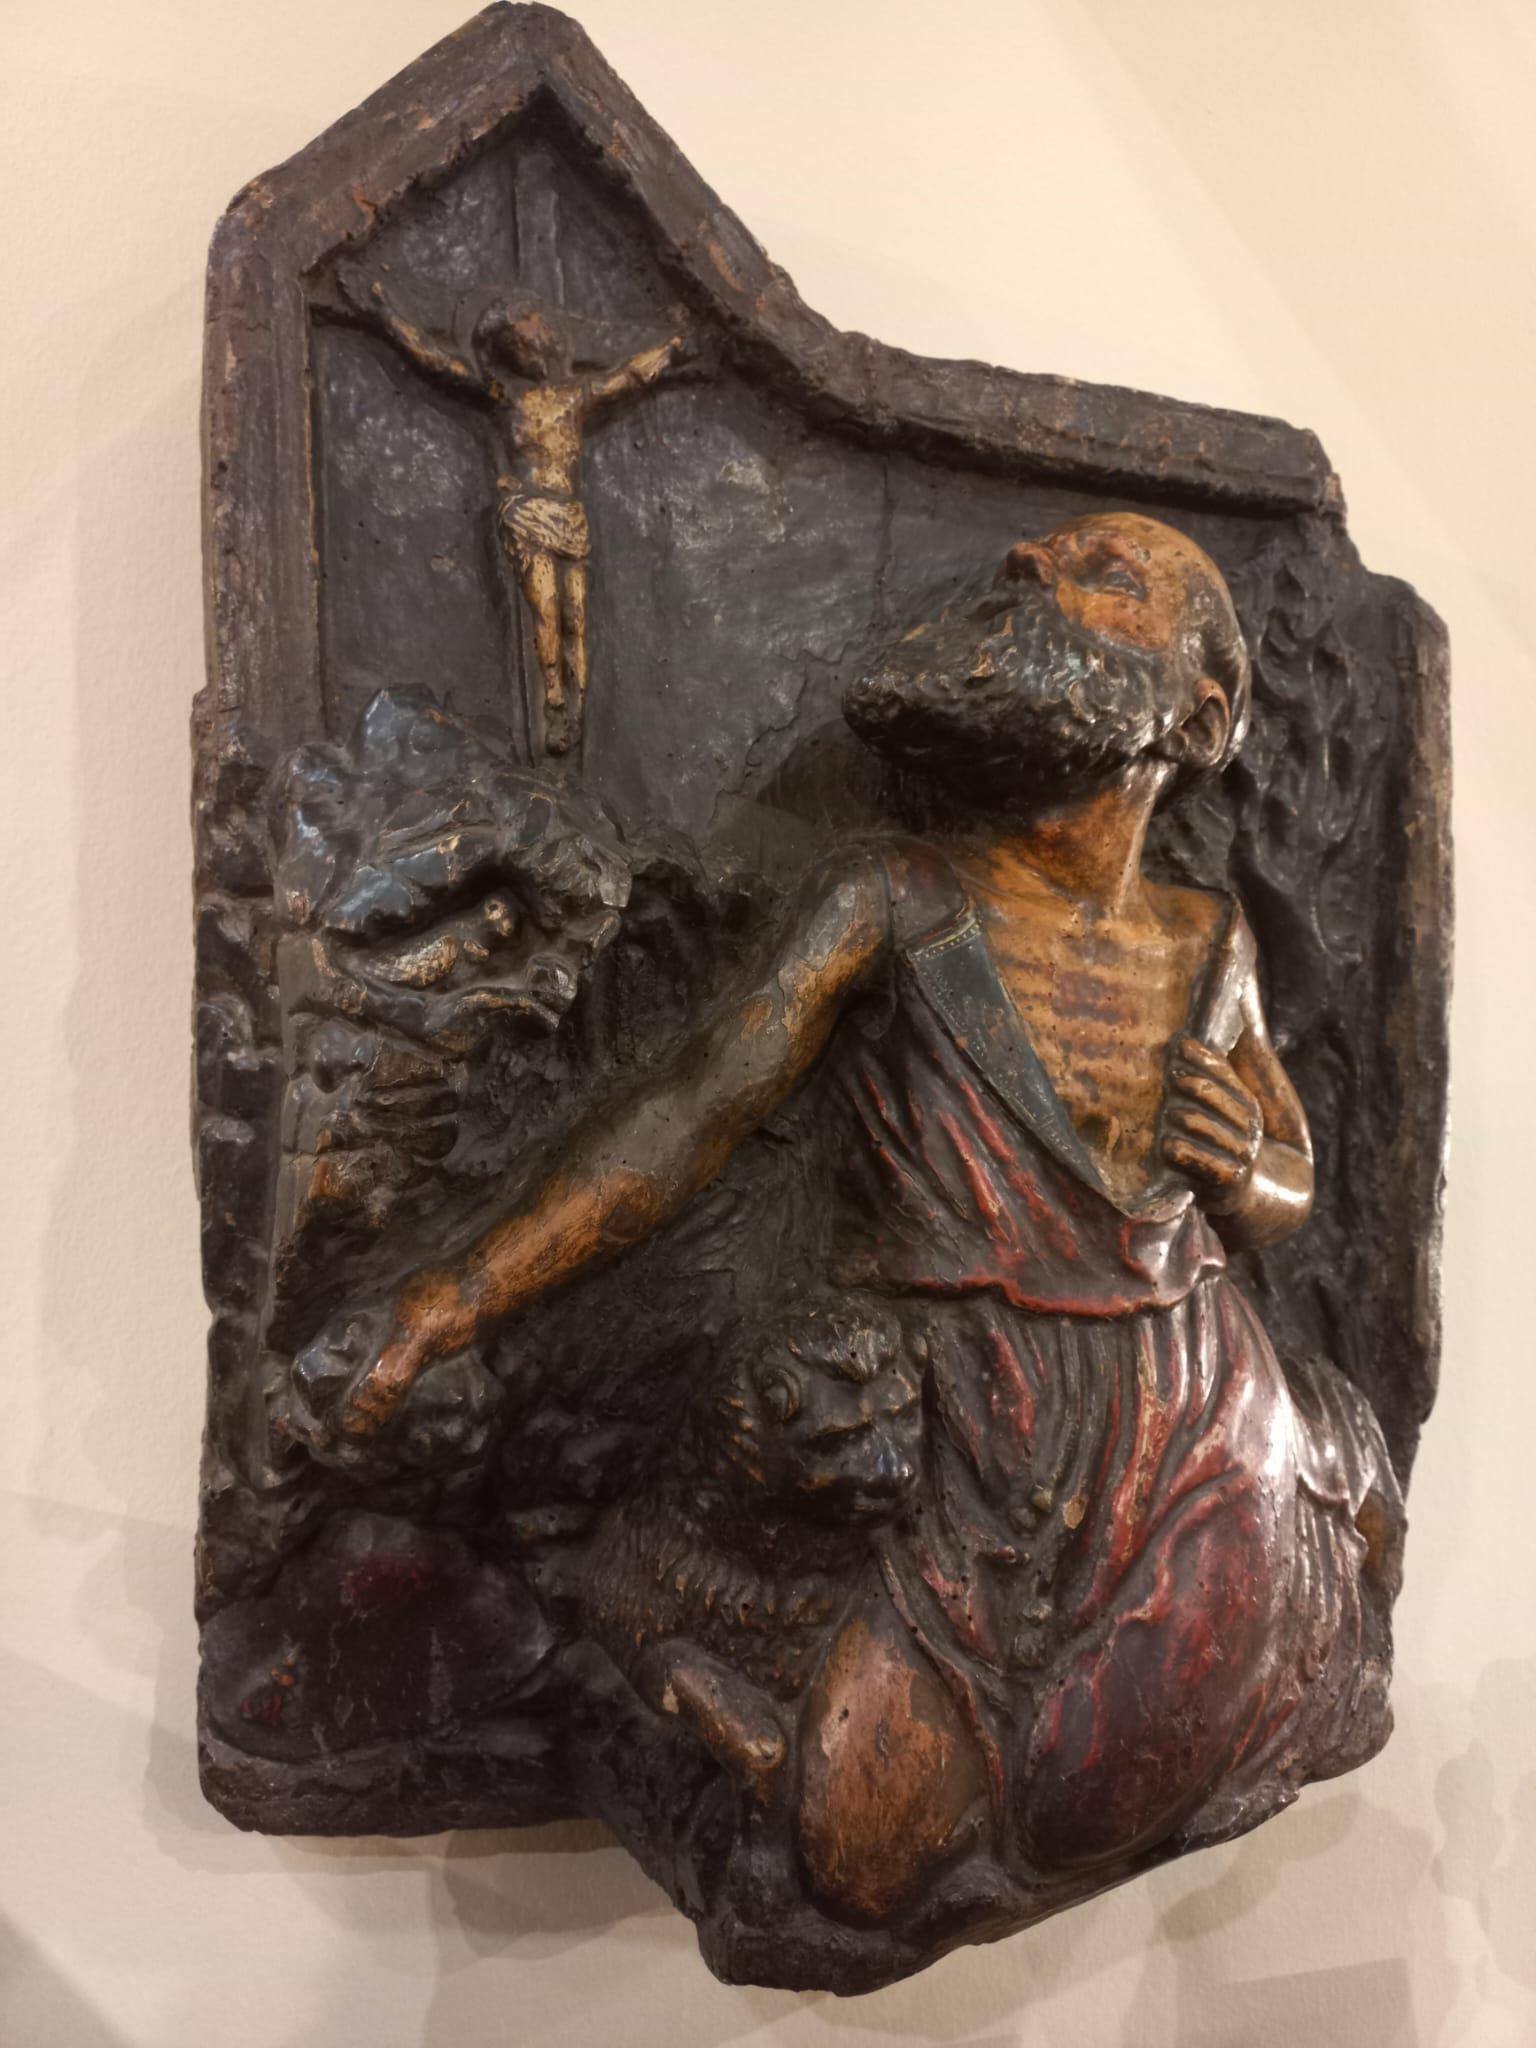 St. Jerome the Penitent, high relief in lacquered wood, Lombard sculpture from the late 15th century/early 16th century, maximum dimensions 76x60 cm, maximum thickness about 19 cm.